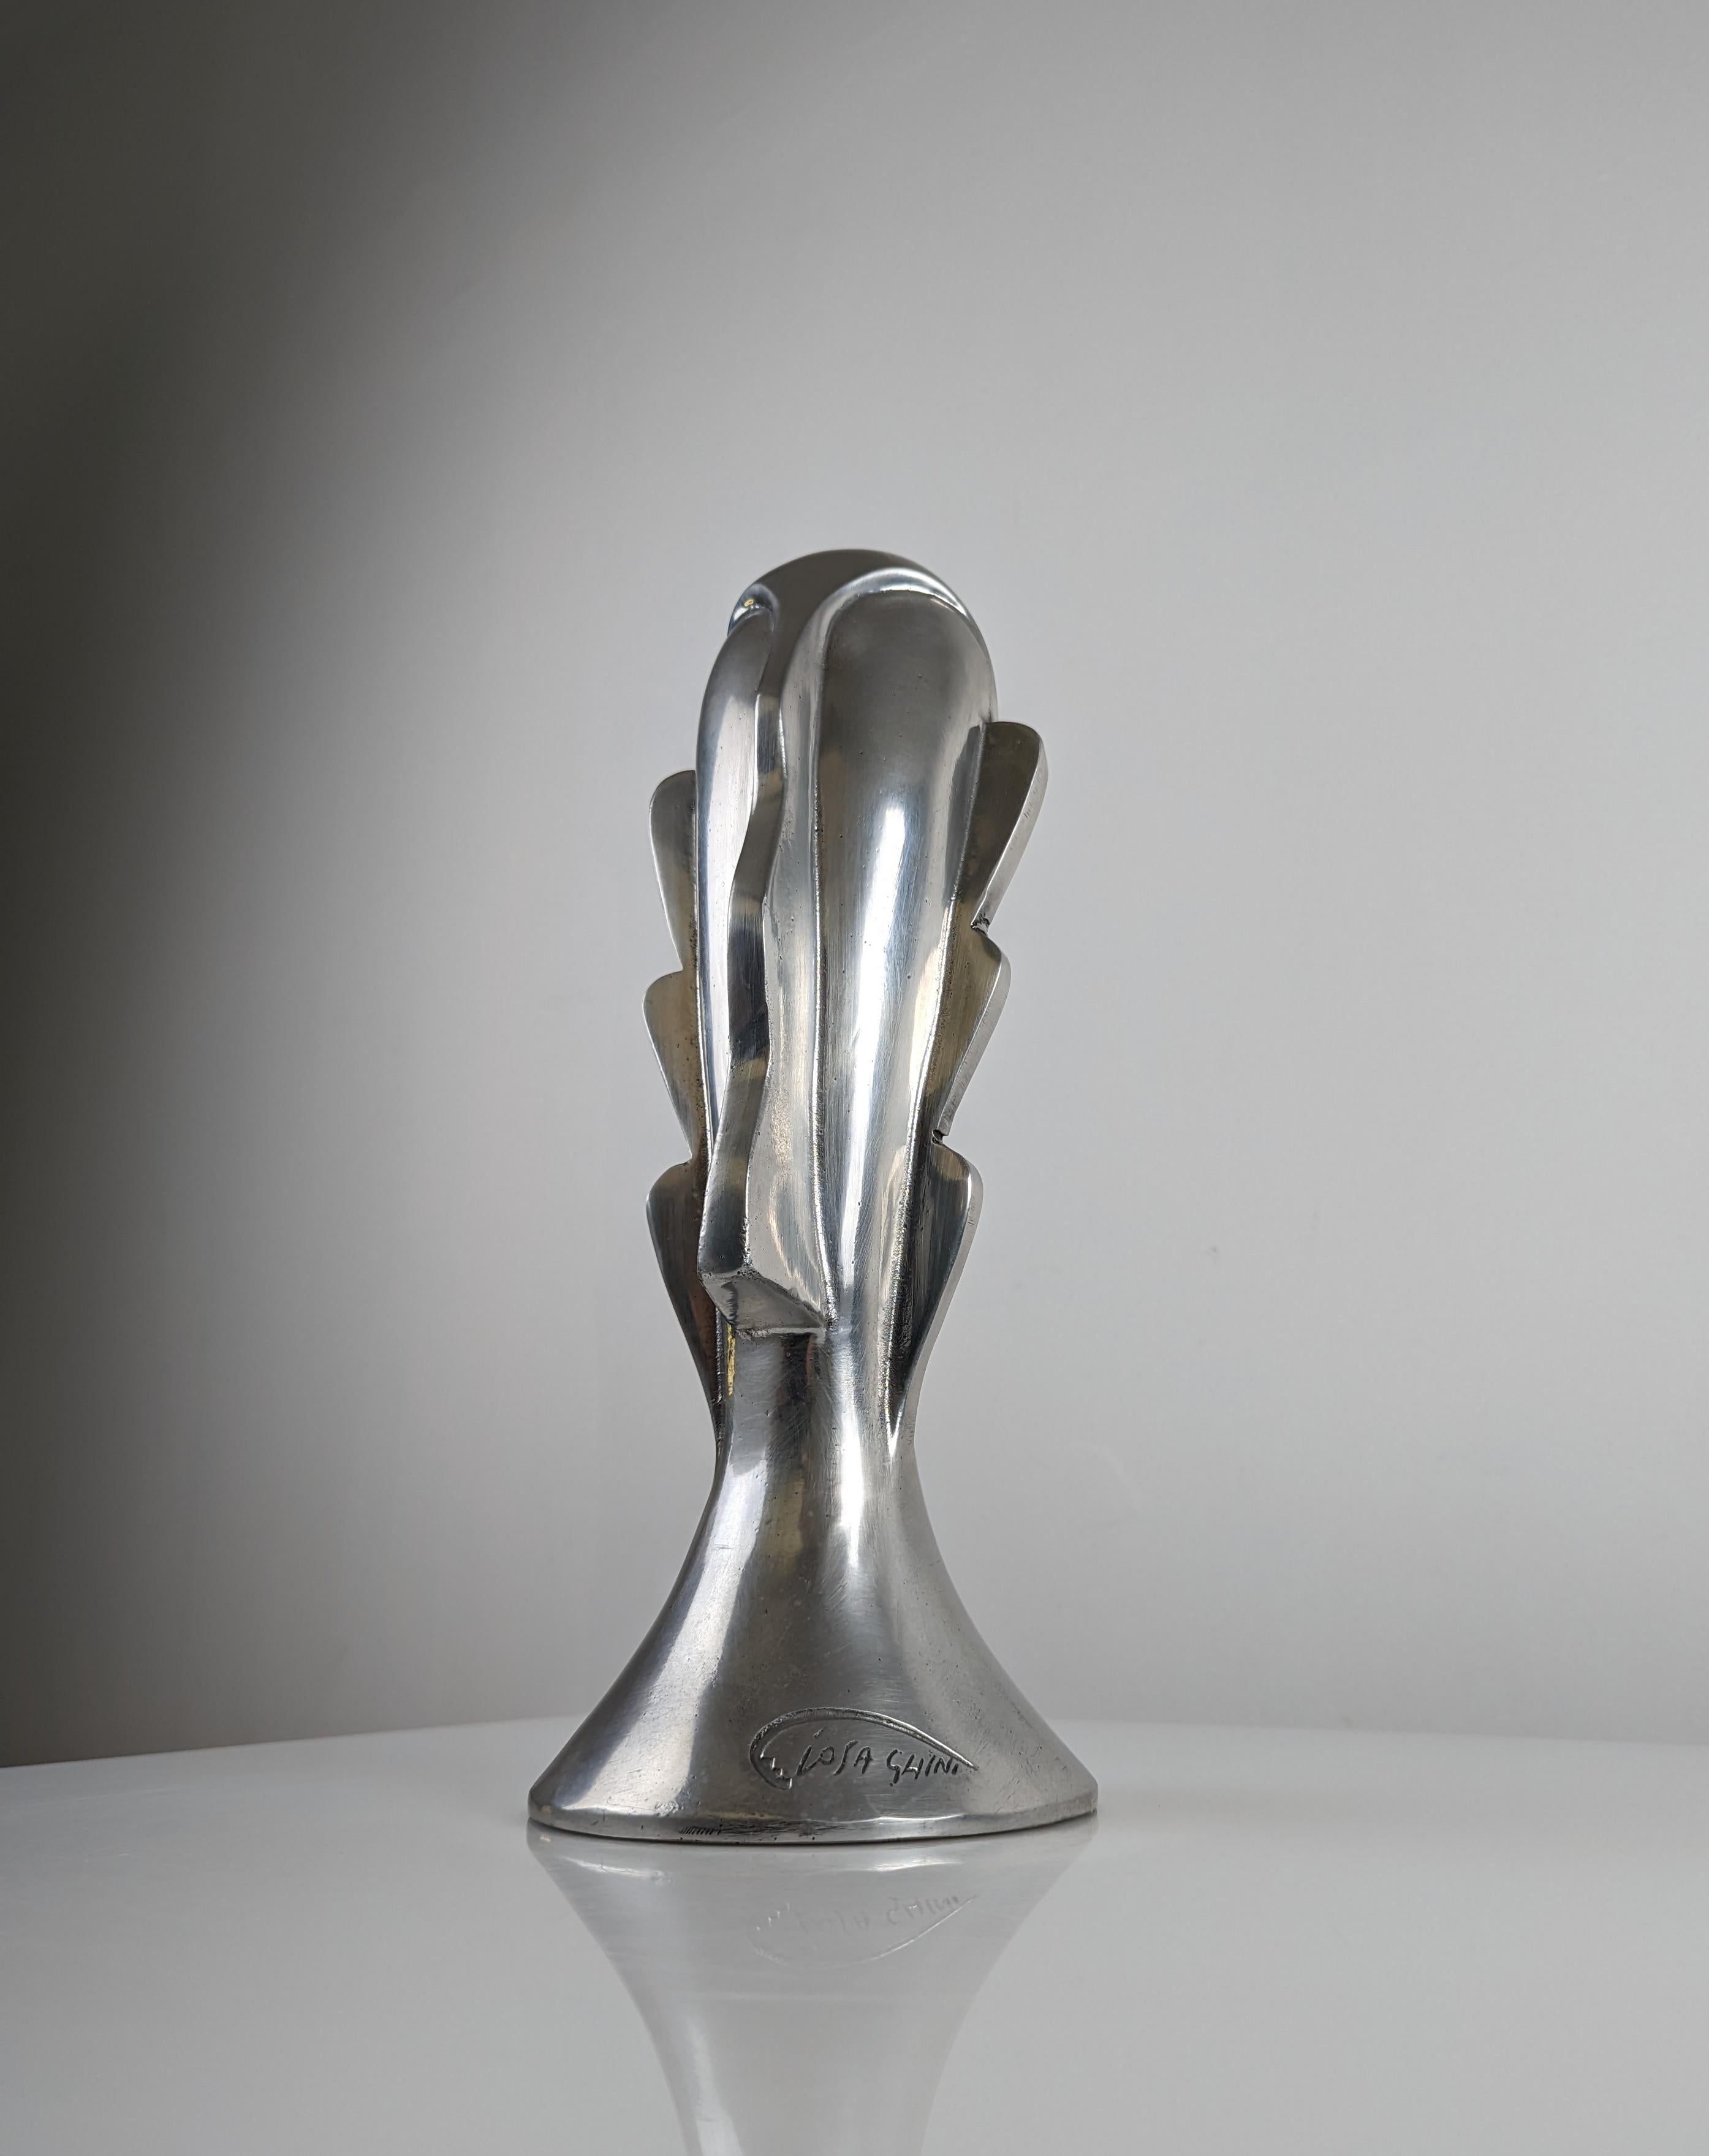 Spectacular abstract head sculpture in aluminum by the great architect and designer Massimo Iosa Ghini, pioneer and founder of the Bolidista Movement and belonging to the Memphis Group in the 80s, thanks to his designs of aerodynamic and organic